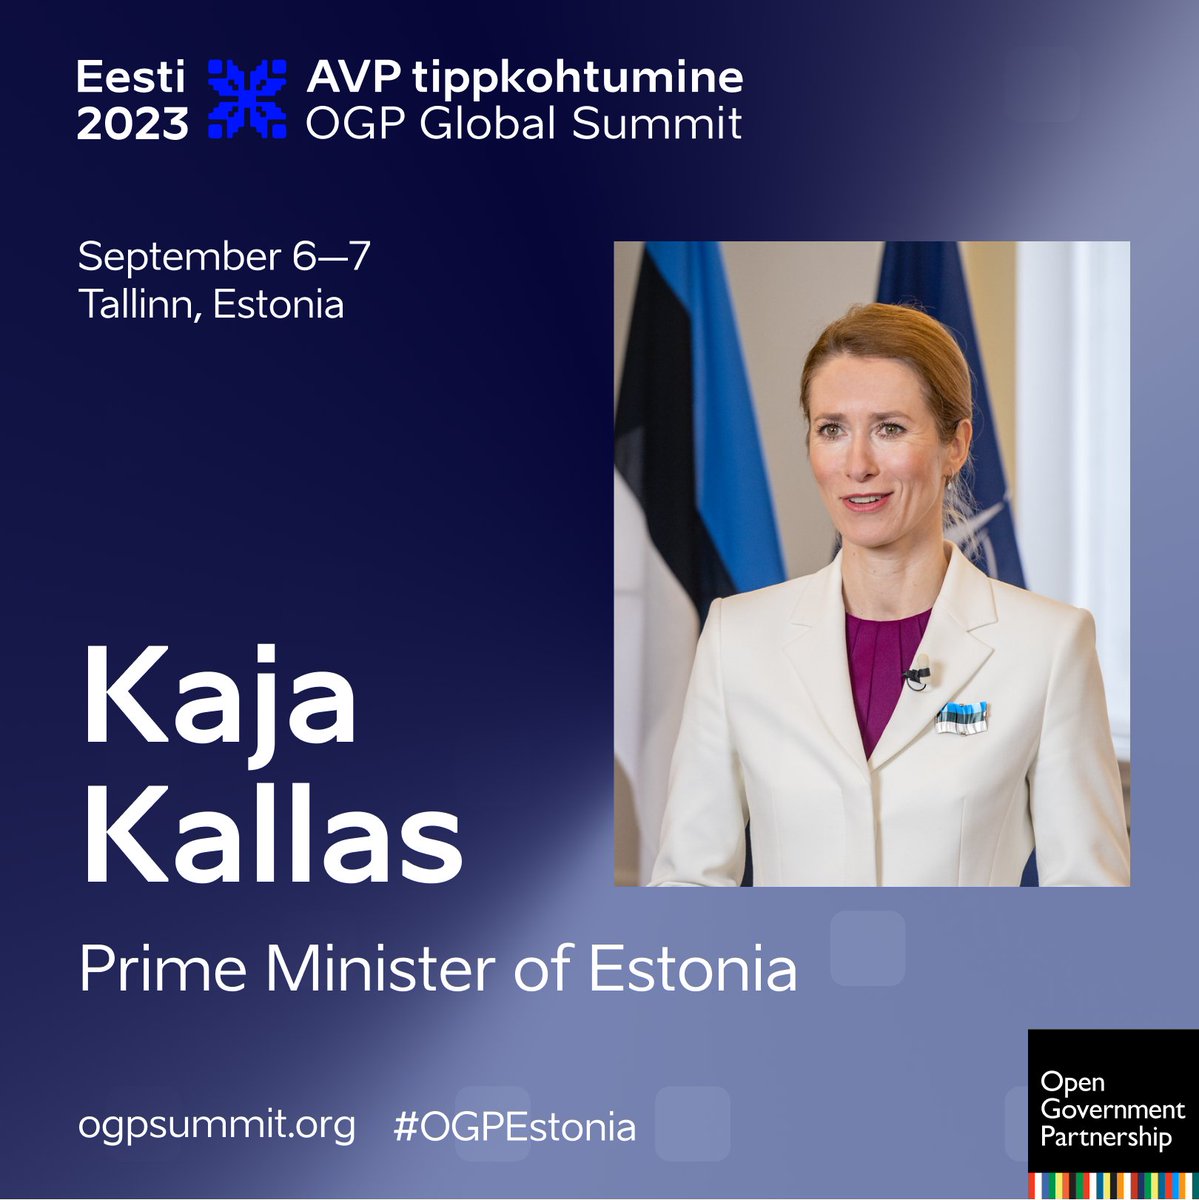 Exciting news! 📣 We are glad to announce that the Prime Minister of Estonia, @KajaKallas will join the #opengov community at the #OGPEstonia Summit on September 6-7. Discover more about the Summit, its themes, and agenda at ogpsummit.org or avpeesti2023.ee